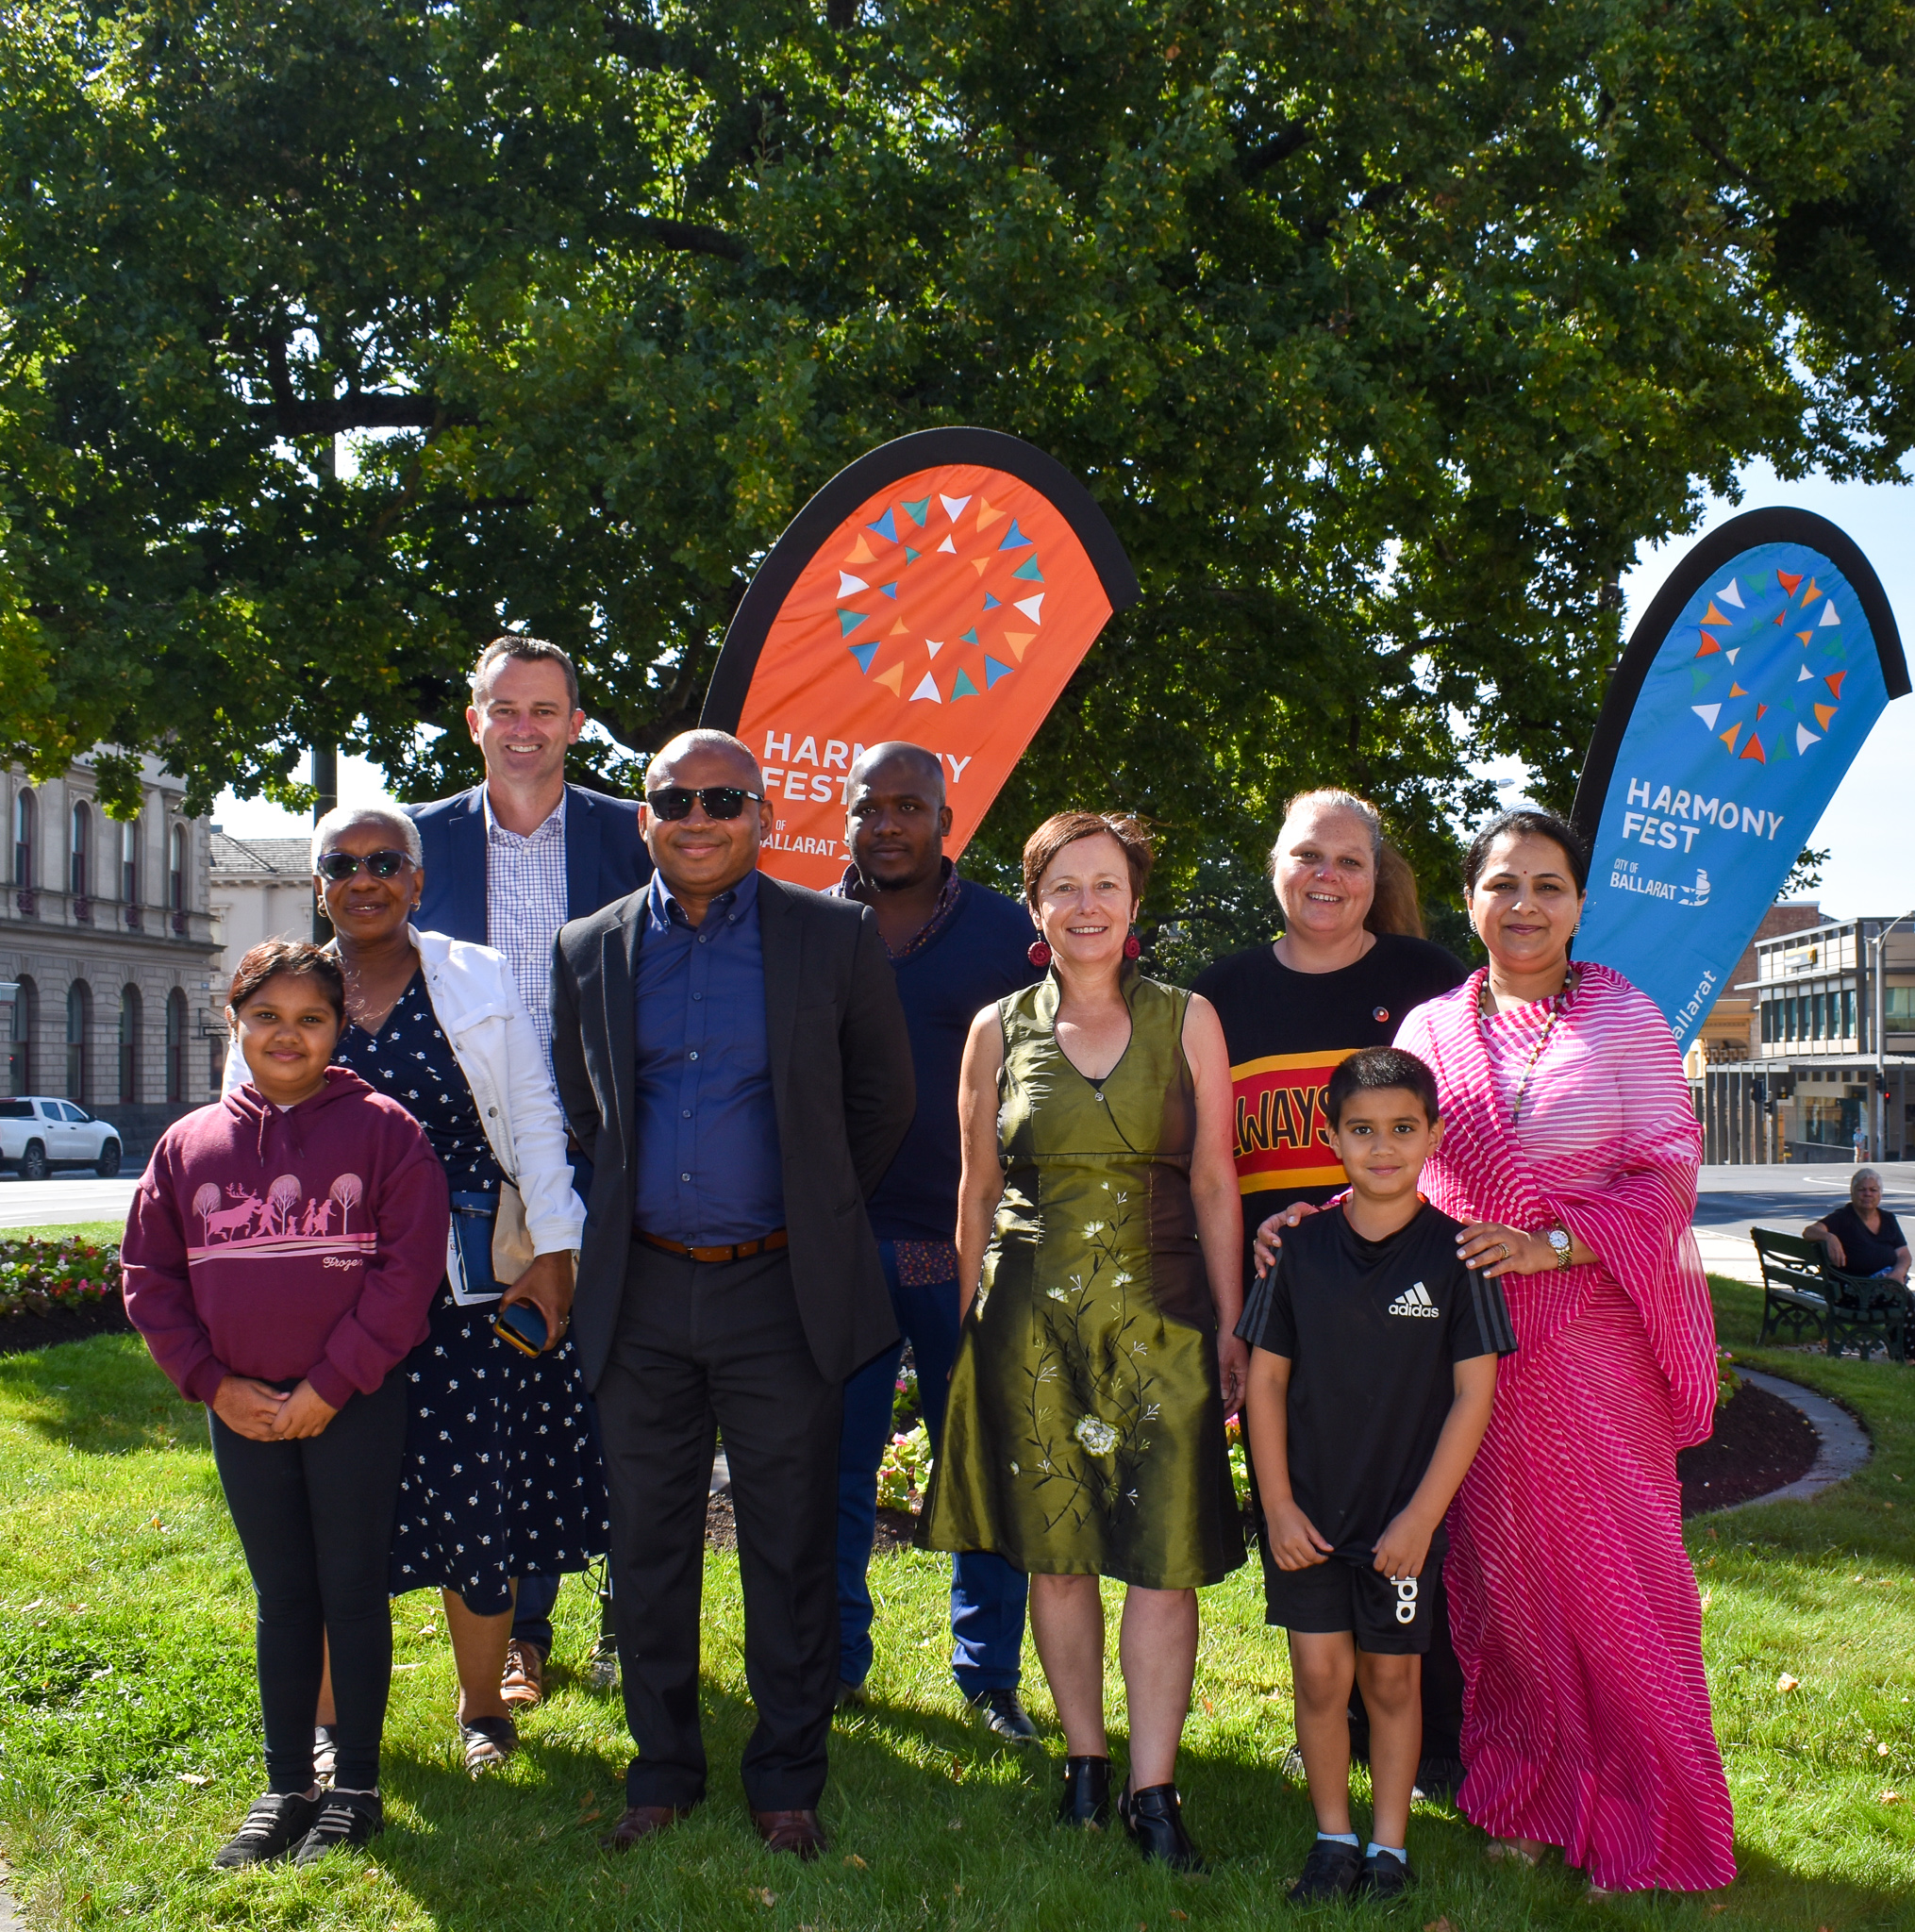 Group of people including Mayor Cr Daniel Moloney and Cr Coates along with Intercultural ambassadors in front of Harmony Fest banners